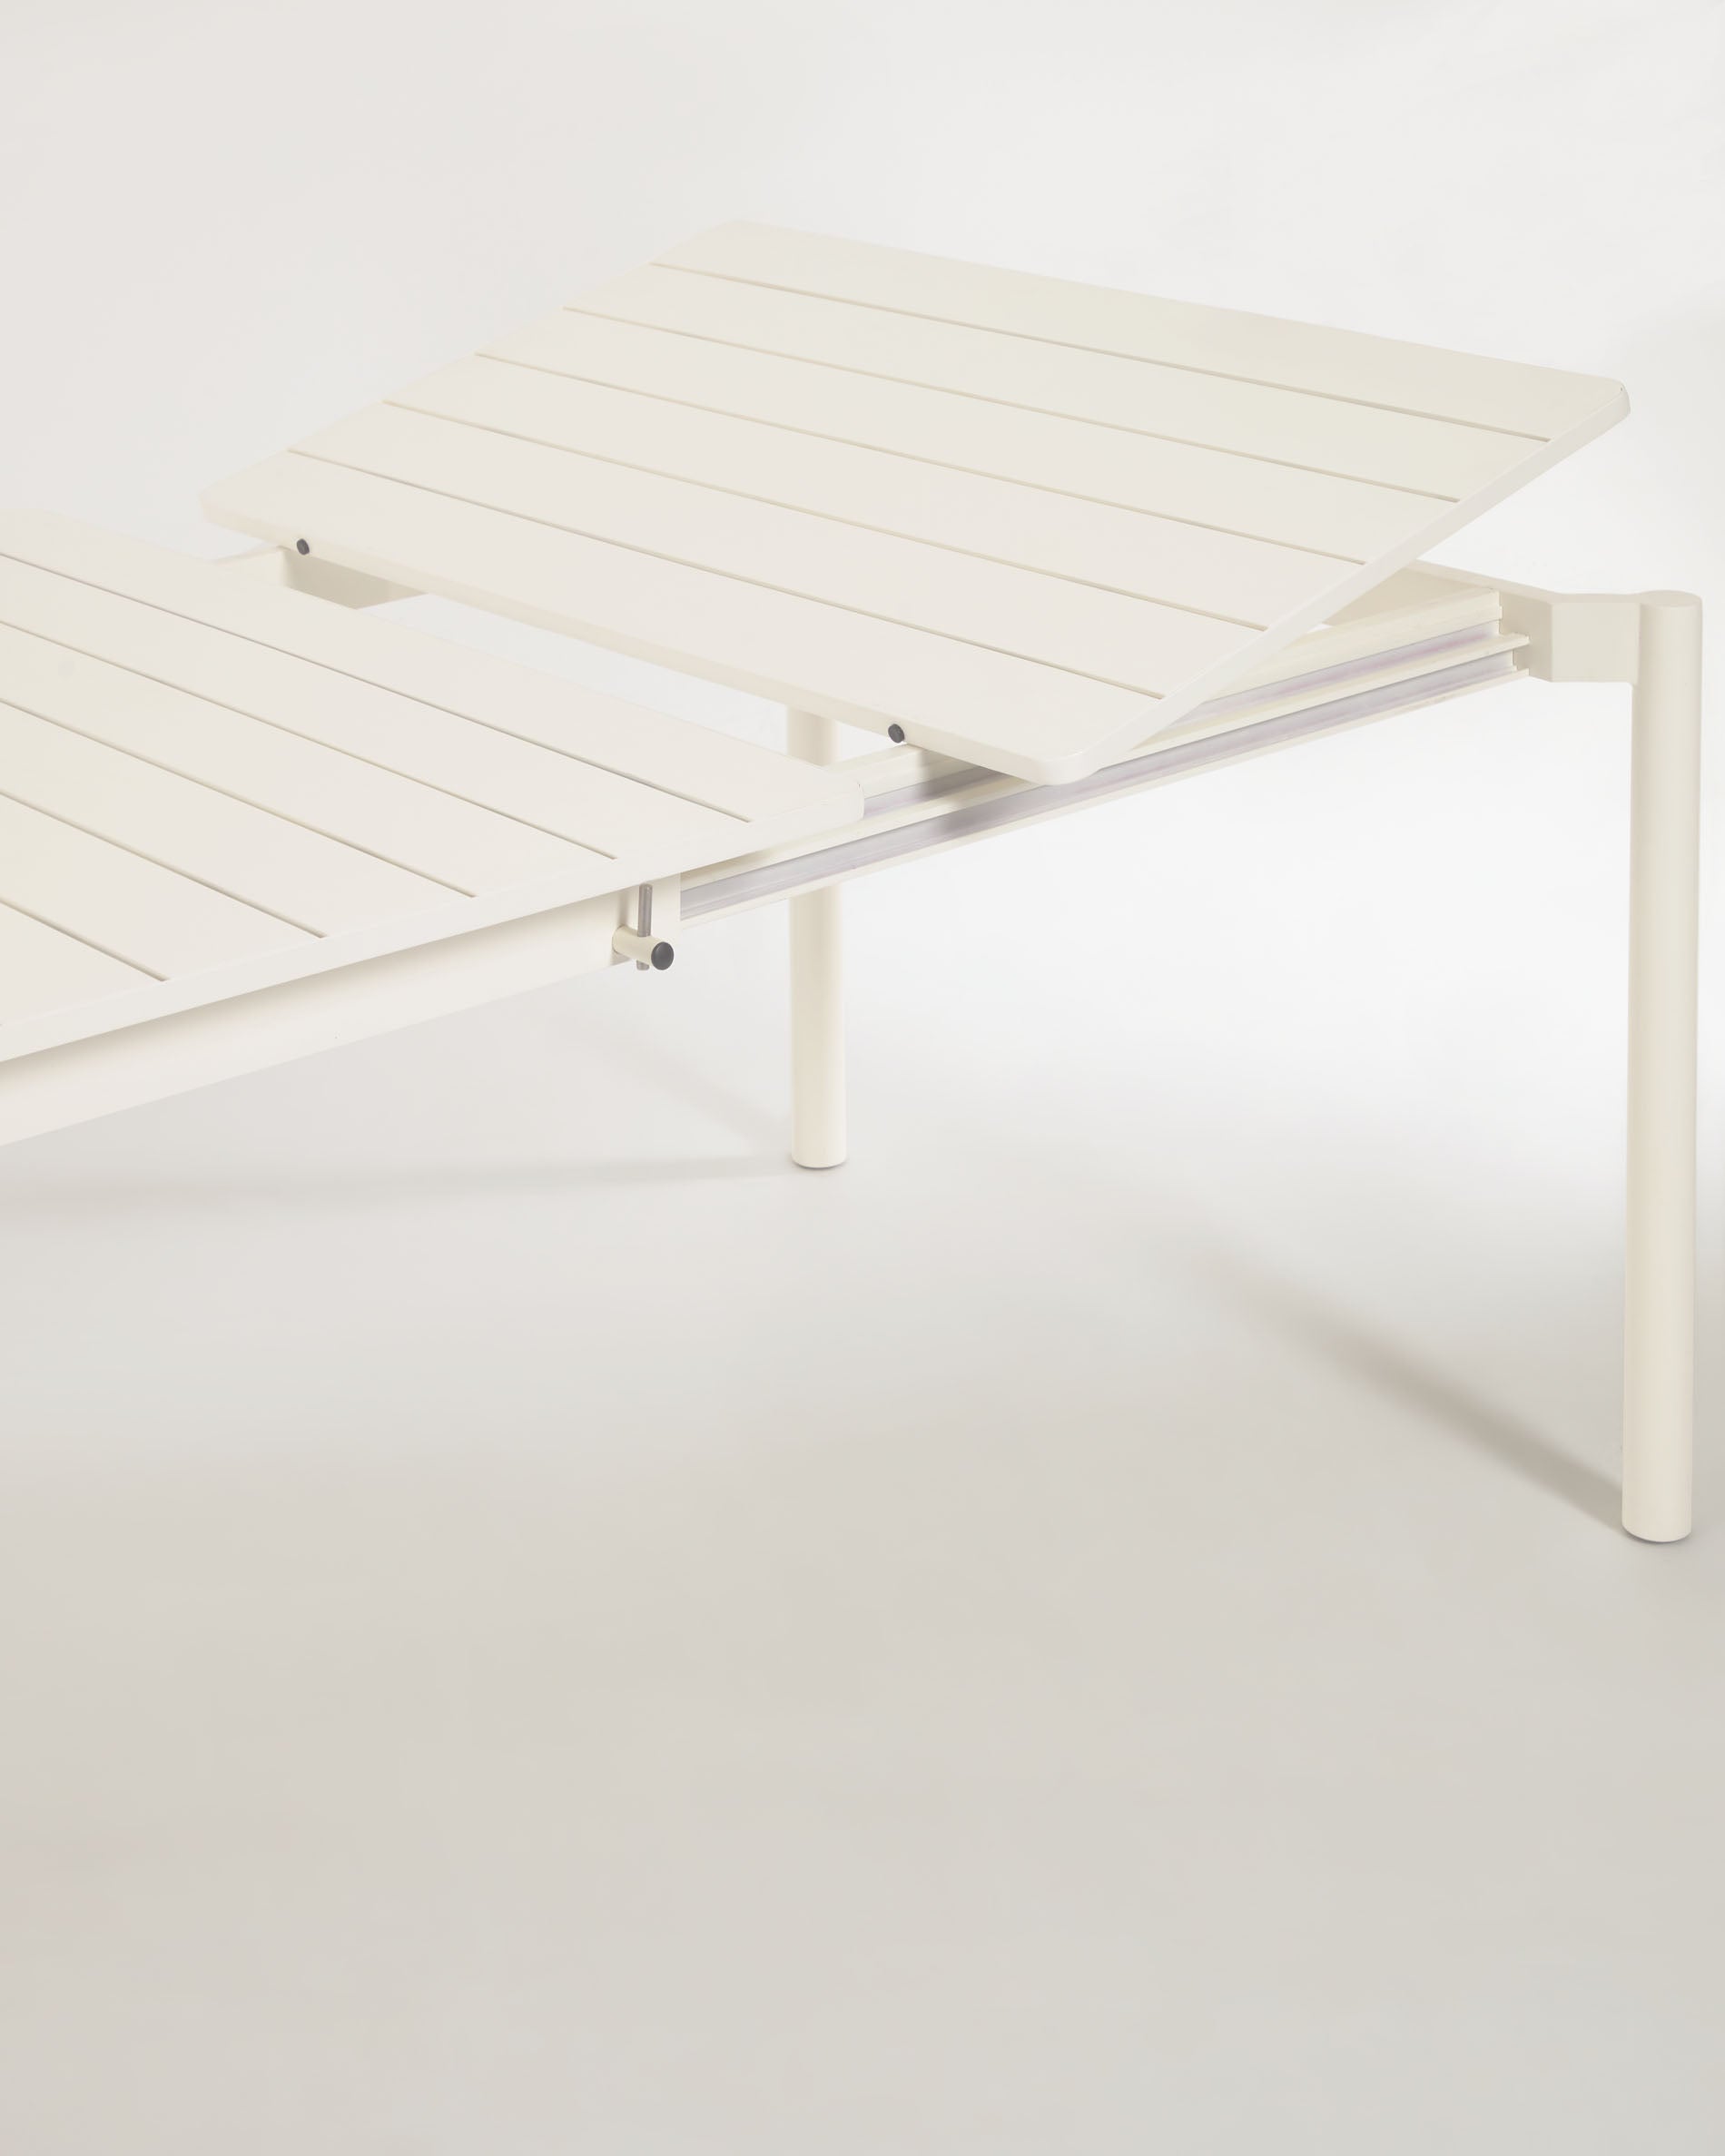 Zaltana extendable outdoor table in aluminum with raw finish, 180 (240) x 100 cm